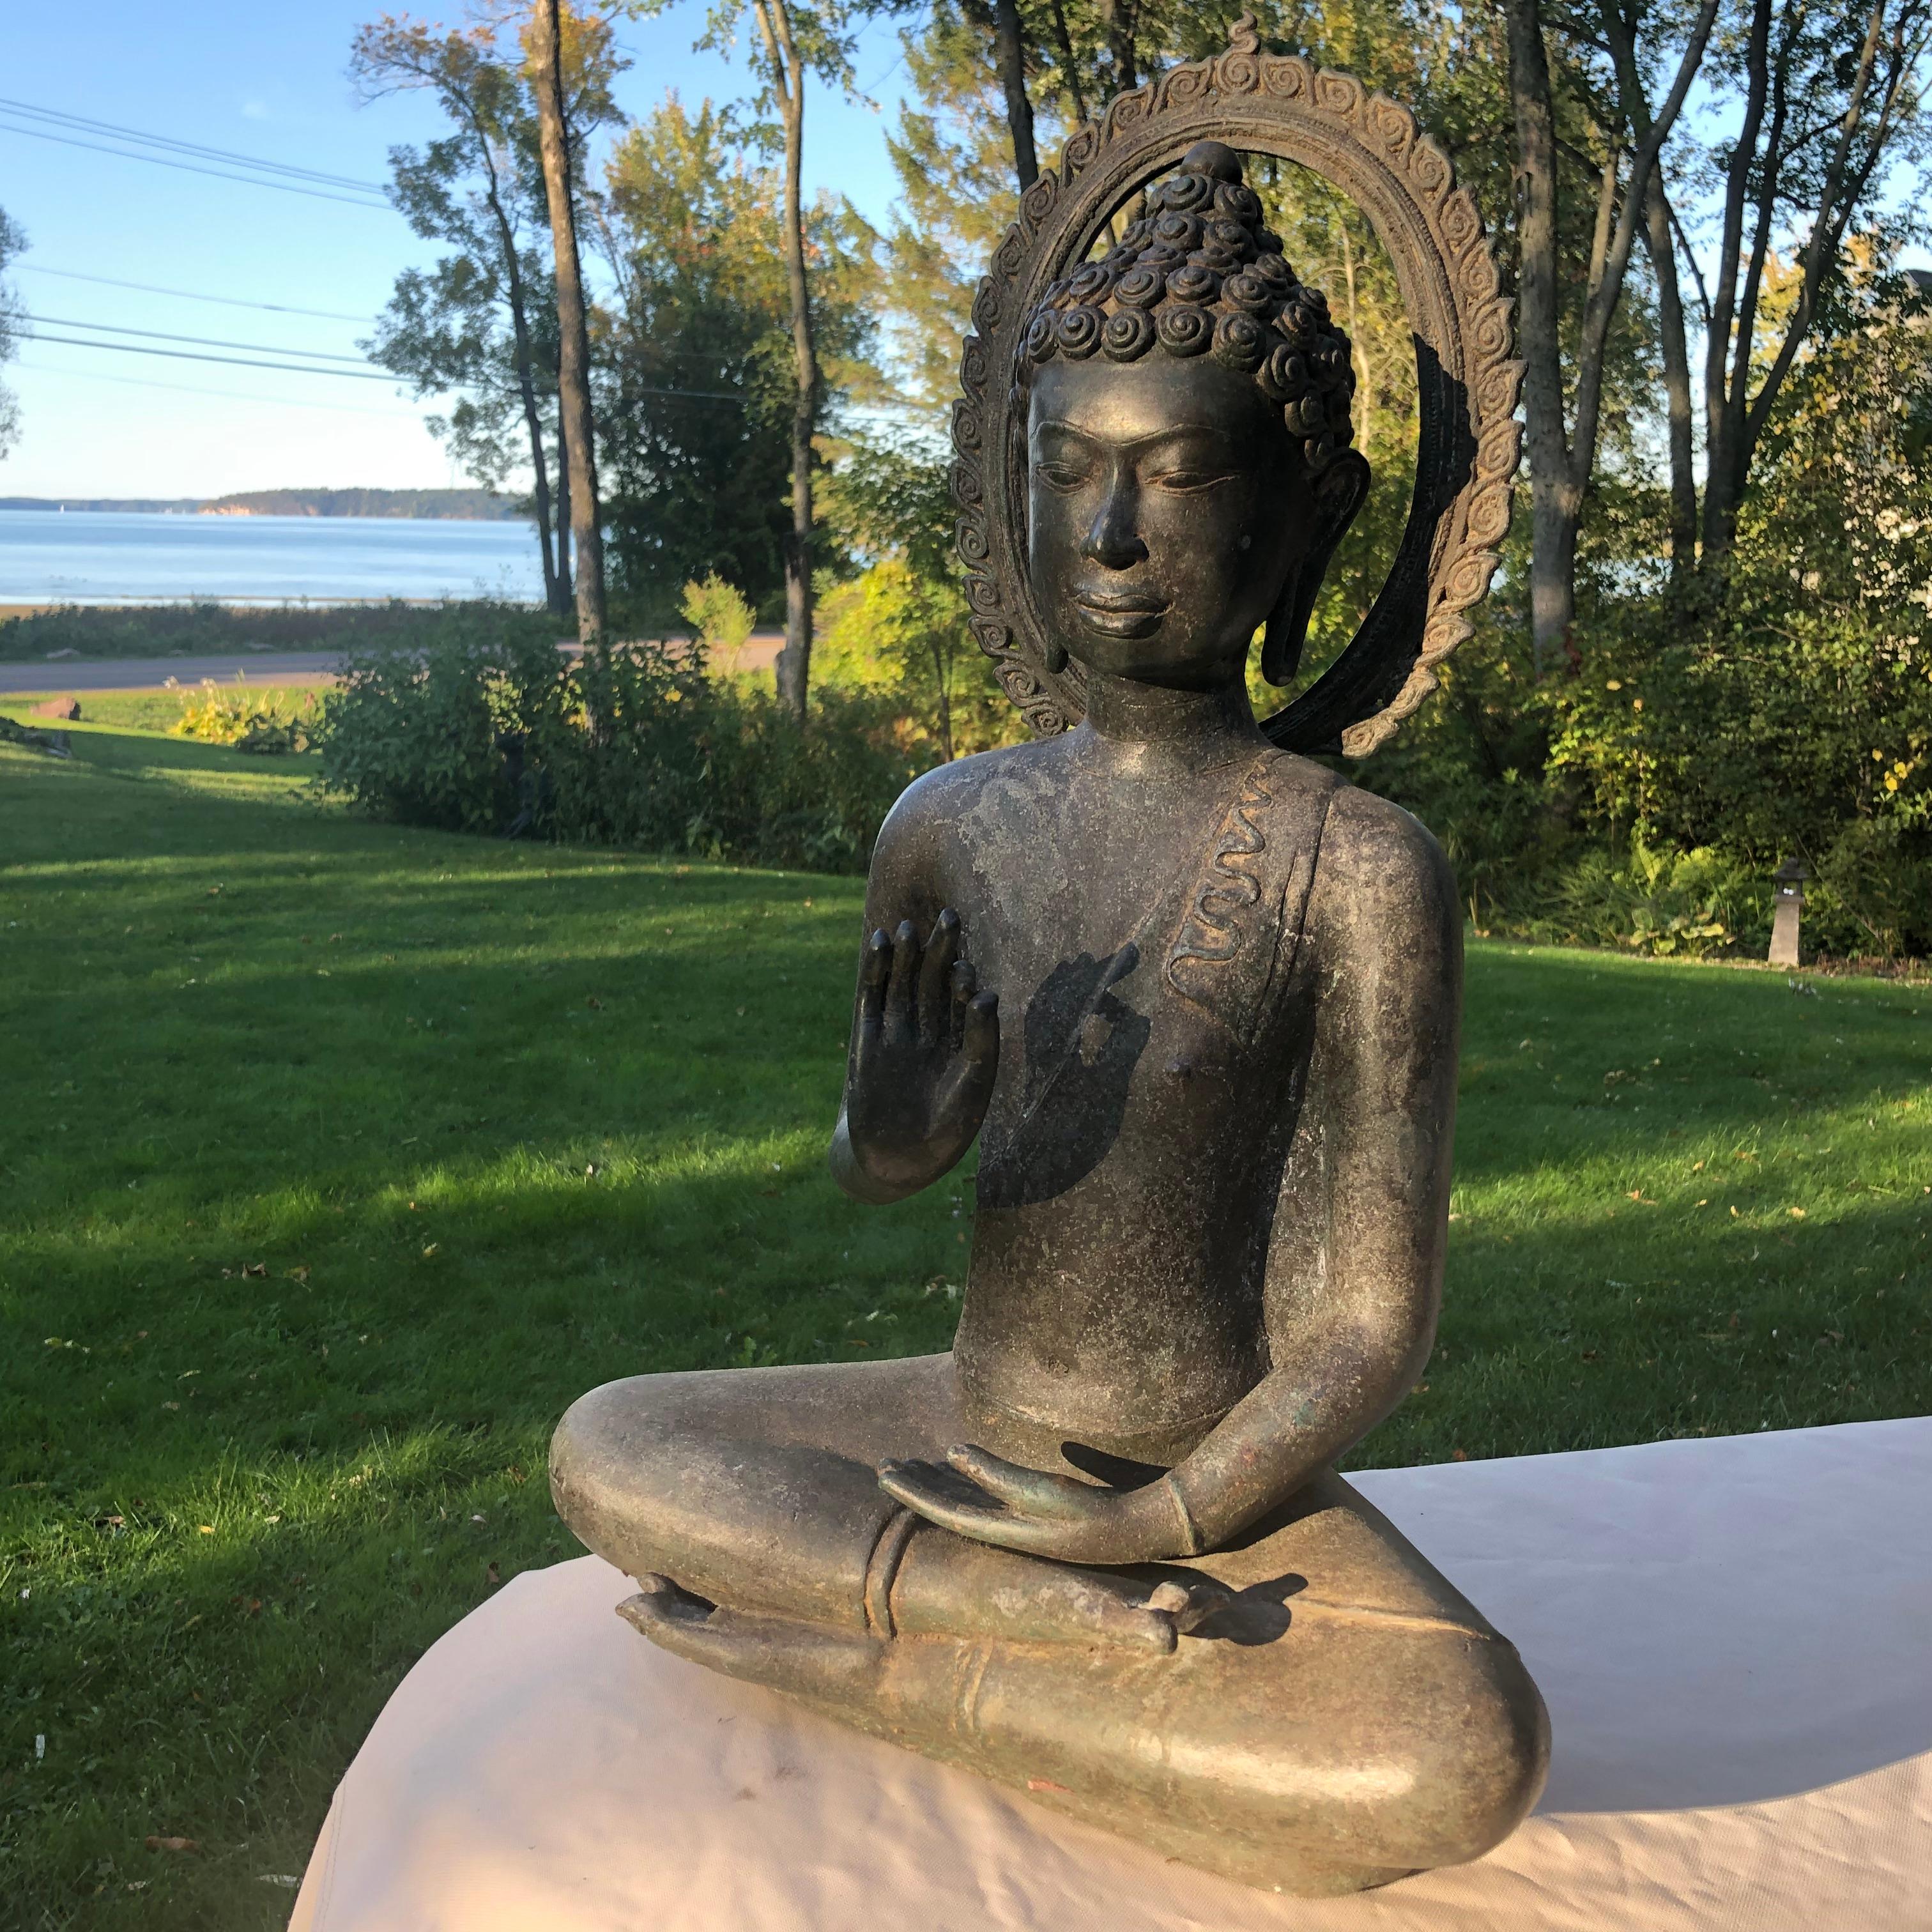 From a forty year old private United Kingdom collection

A Lovely Buddha seated in the padmasana or full lotus position, with his hands raised in front of his chest in the dharmachakra mudra- teaching or preaching the